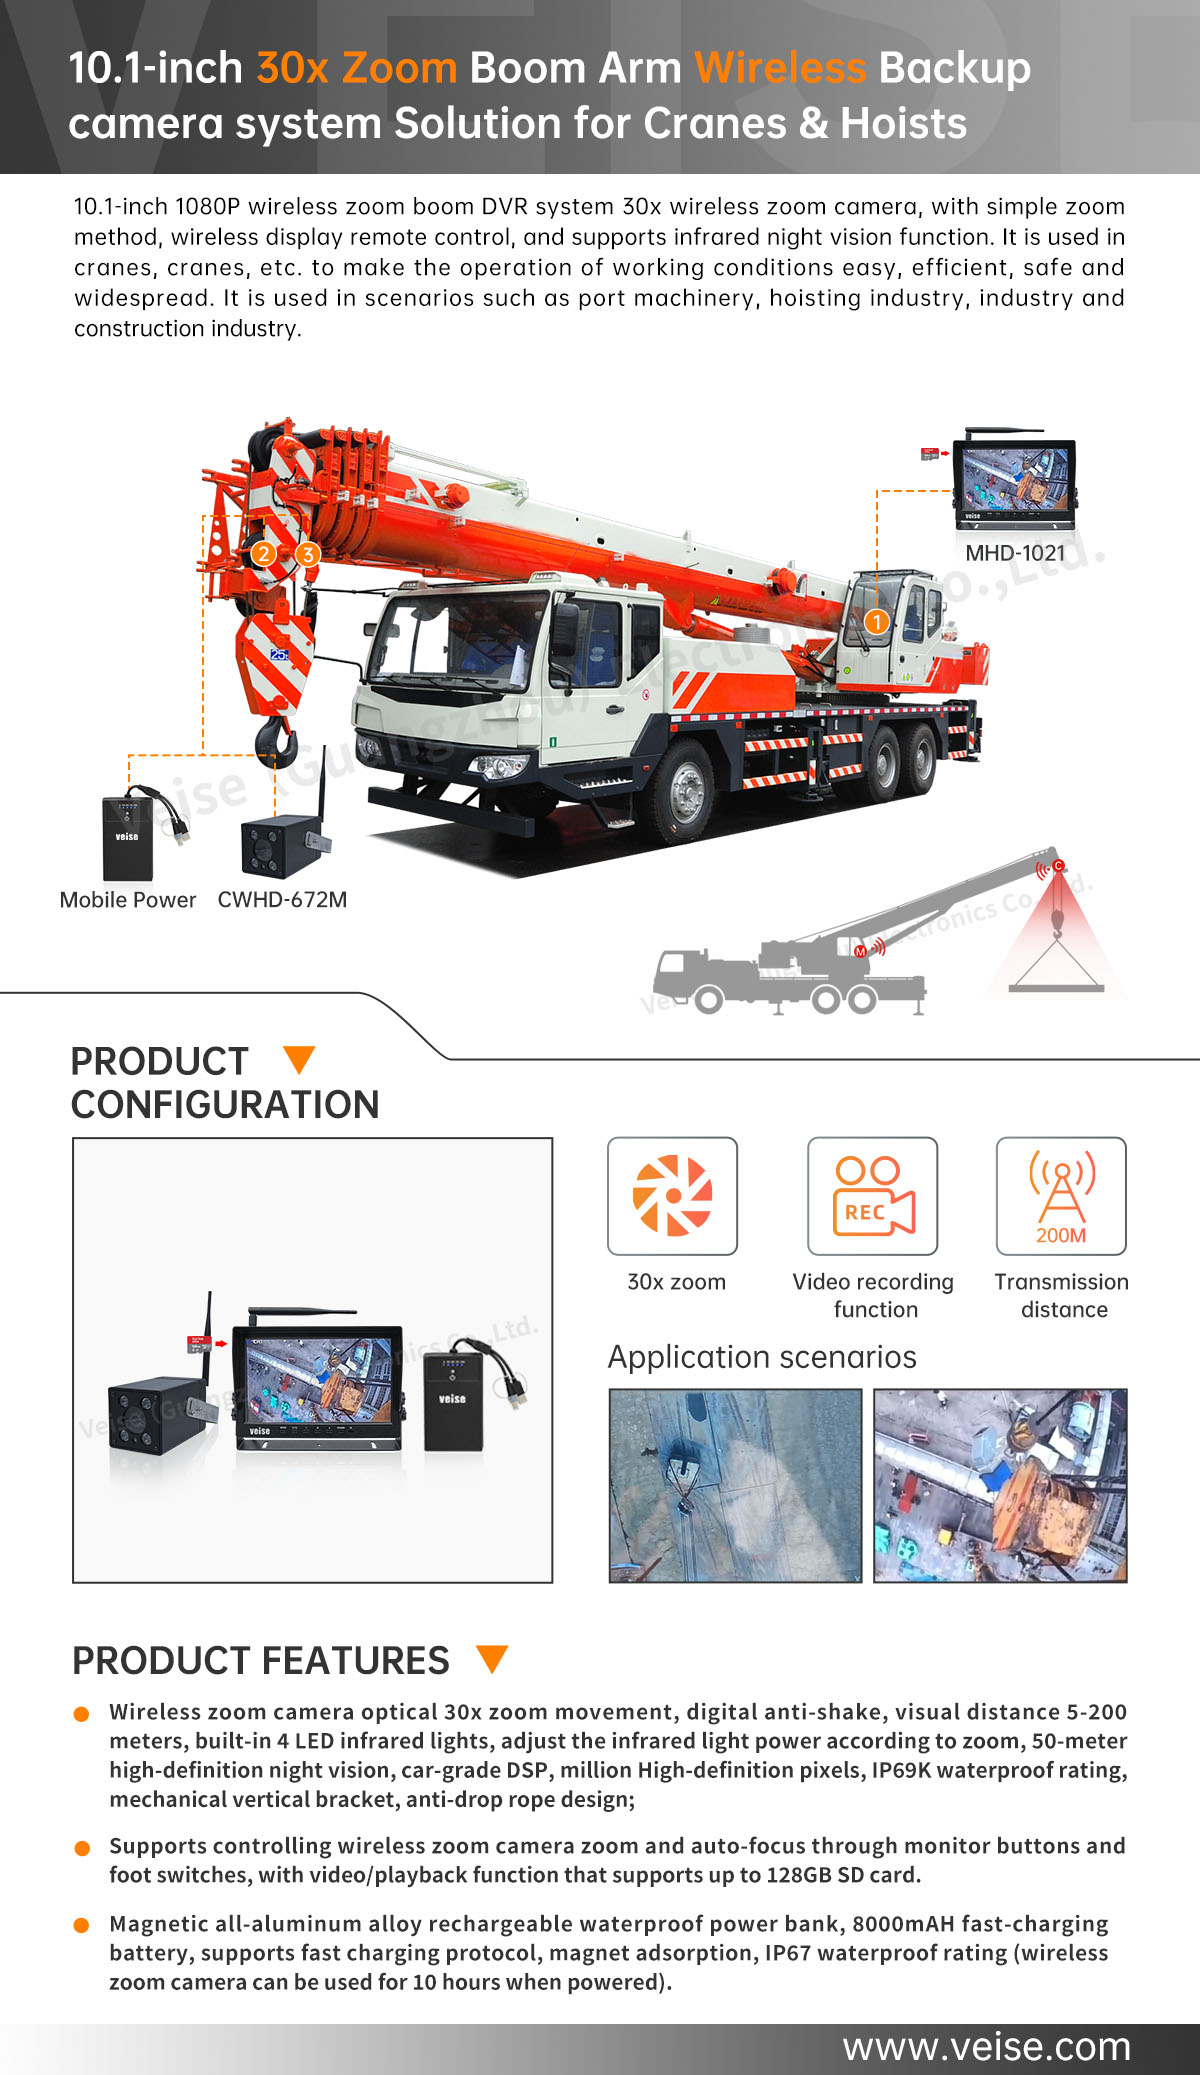 10.1-inch 30x Zoom Boom Arm Wireless Backup camera system Solution for Cranes & Hoists